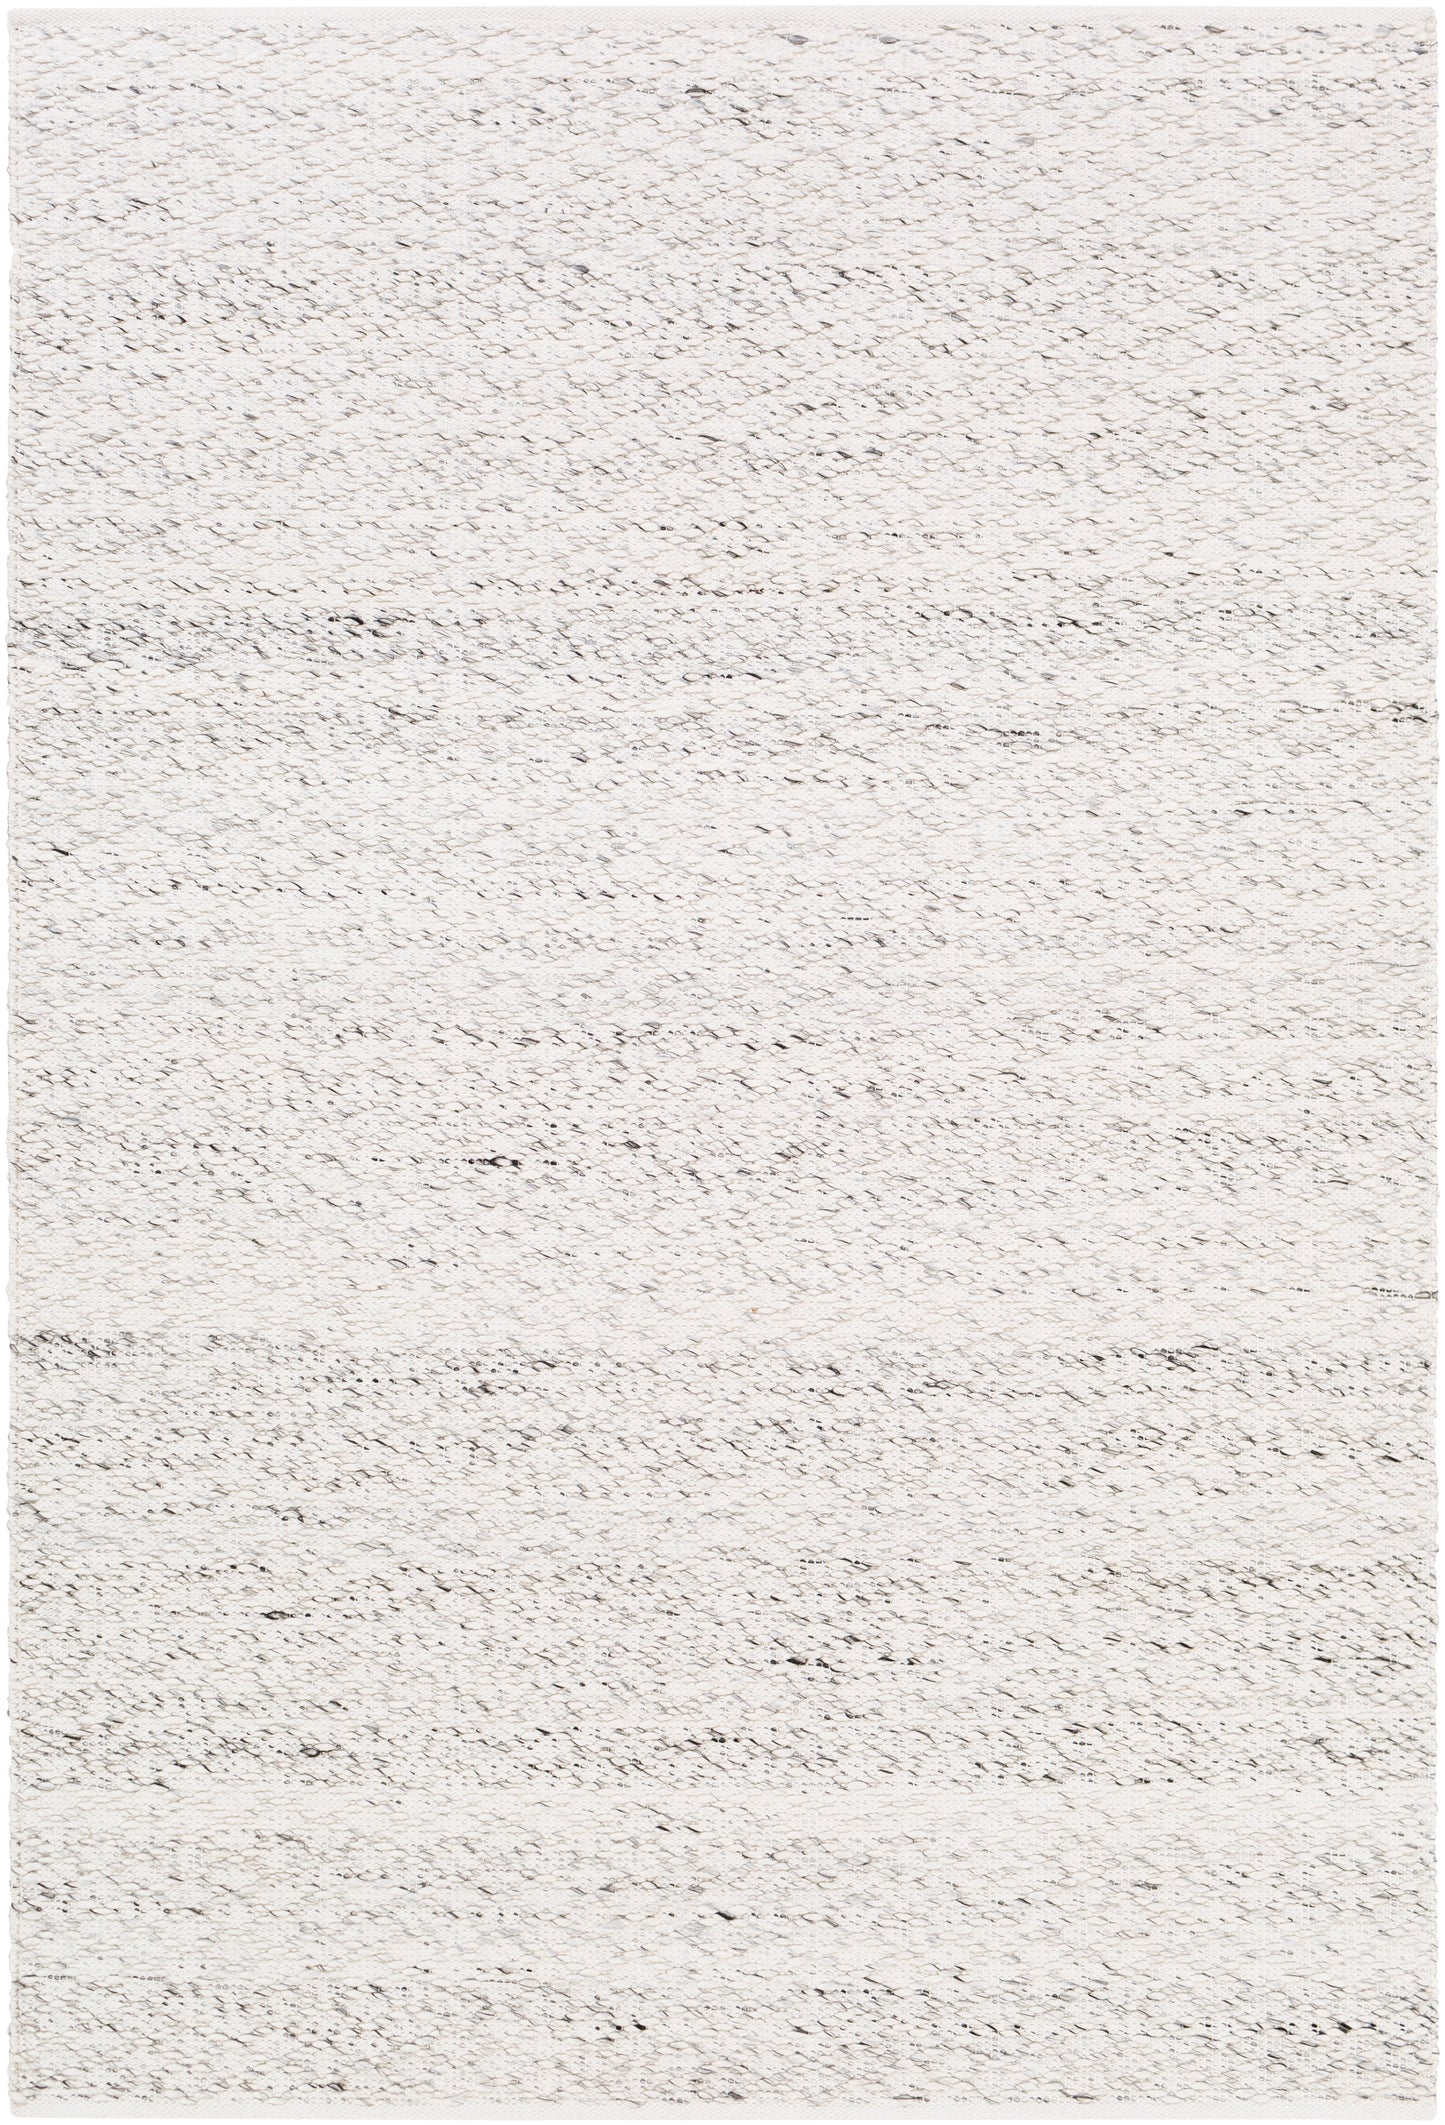 Modena 23132 Hand Woven Synthetic Blend Indoor Area Rug by Surya Rugs